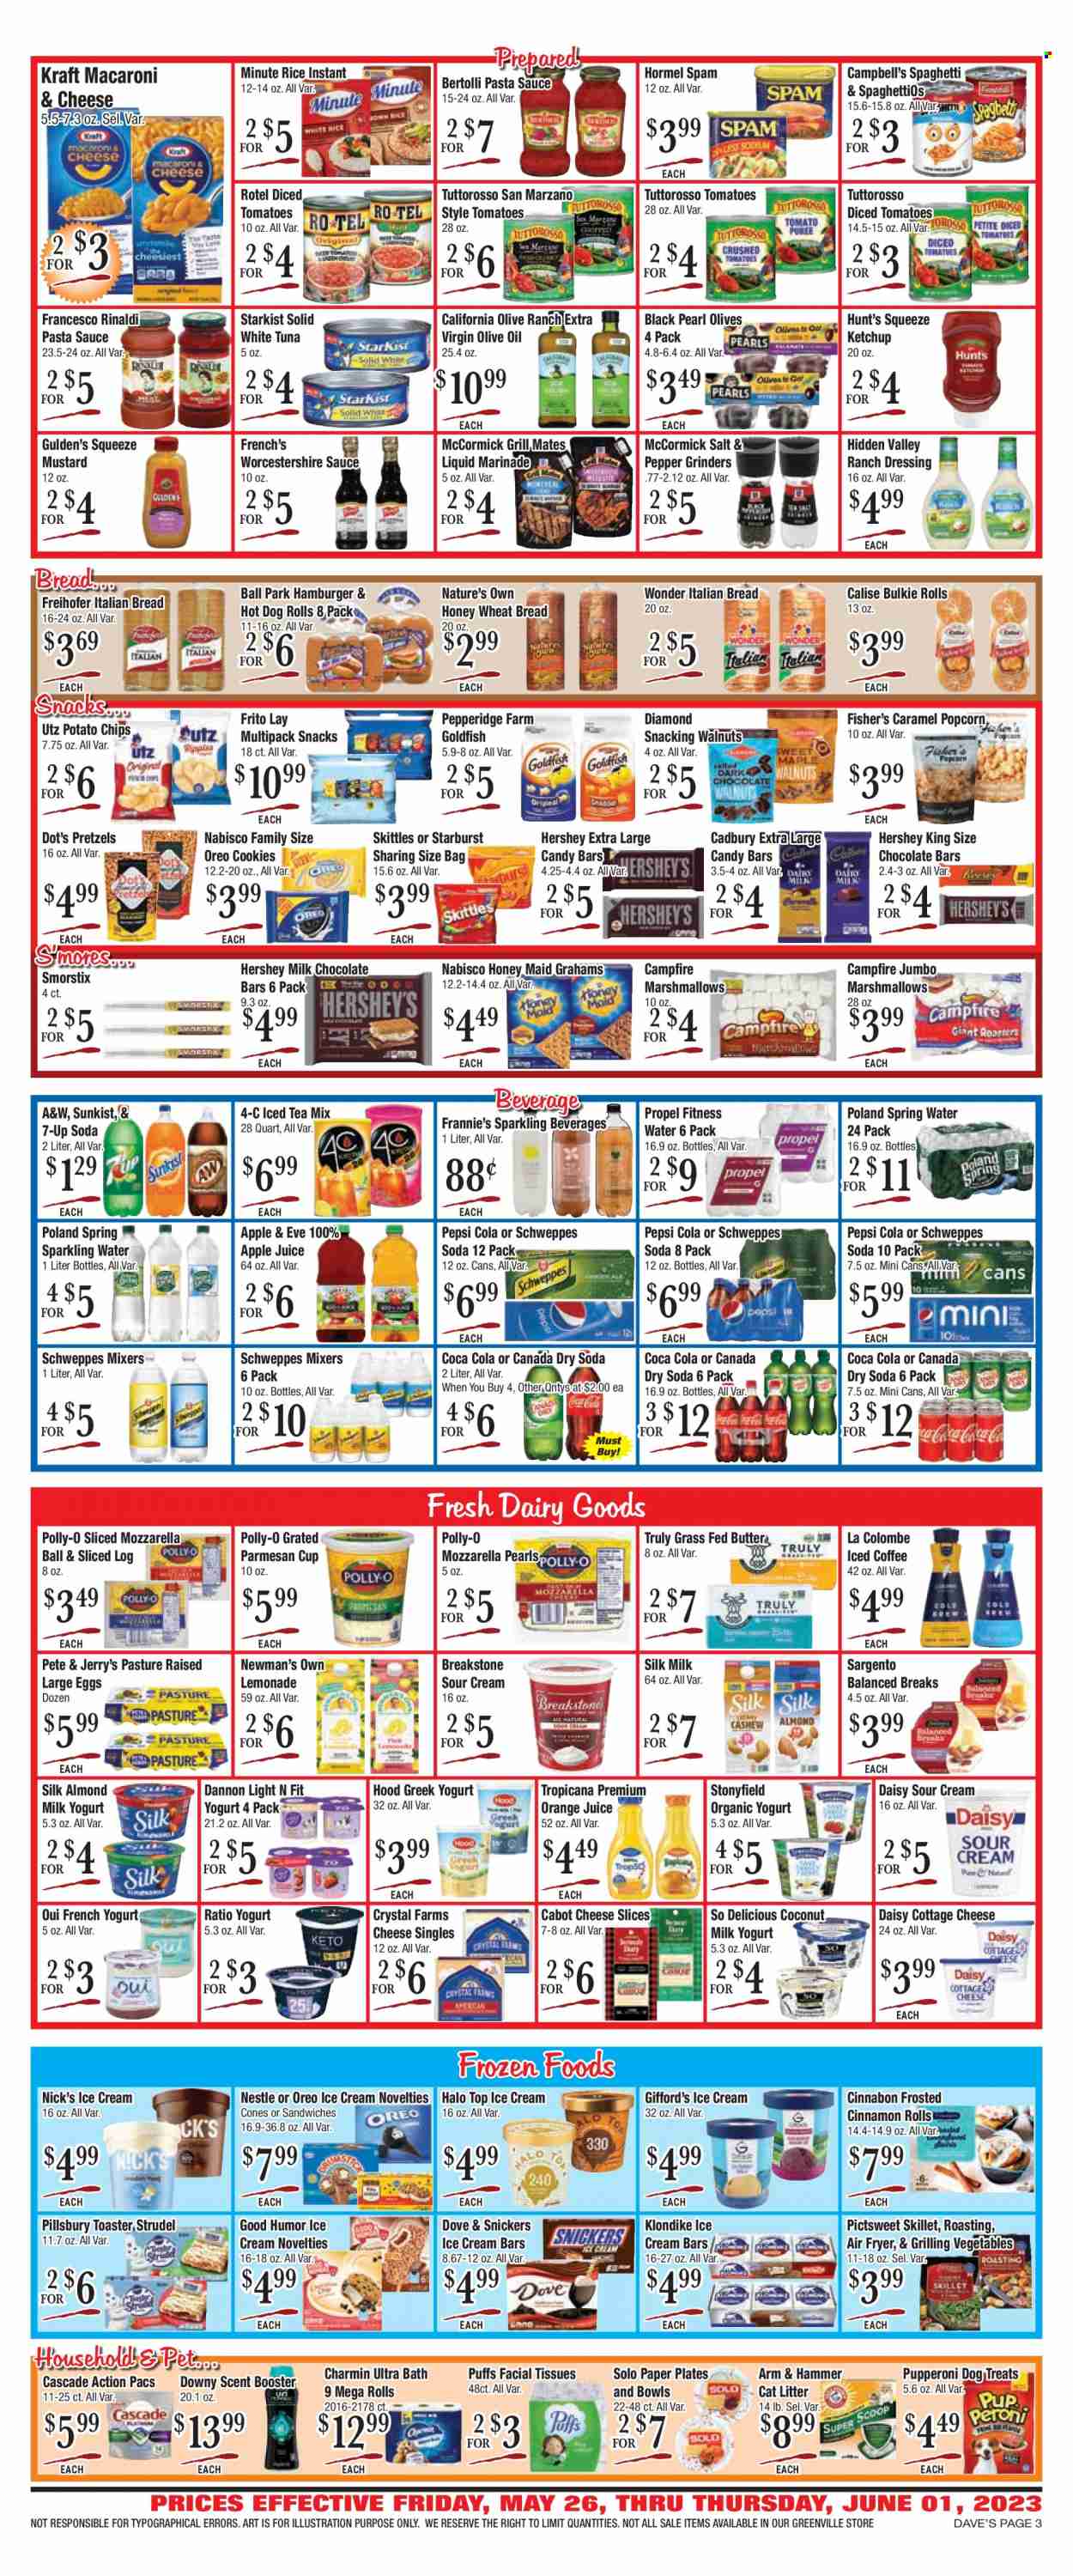 thumbnail - Dave's Fresh Marketplace Flyer - 05/26/2023 - 06/01/2023 - Sales products - wheat bread, hot dog rolls, pretzels, strudel, cinnamon roll, puffs, tuna, StarKist, Campbell's, macaroni & cheese, spaghetti, pasta sauce, hamburger, Pillsbury, Kraft®, Bertolli, Hormel, snack, Spam, cottage cheese, mozzarella, sliced cheese, parmesan, cheese, Sargento, greek yoghurt, Oreo, organic yoghurt, Dannon, almond milk, large eggs, sour cream, ranch dressing, ice cream, ice cream bars, Nick's Ice Cream, cookies, Dove, marshmallows, milk chocolate, Nestlé, Snickers, Cadbury, Skittles, Starburst, chocolate bar, candy bar, Nabisco, waffle cones, potato chips, popcorn, Goldfish, salty snack, ARM & HAMMER, coconut milk, olives, diced tomatoes, Honey Maid, rice, caramel, mustard, worcestershire sauce, ketchup, dressing, marinade, extra virgin olive oil, olive oil, walnuts, apple juice, Canada Dry, Coca-Cola, lemonade, Schweppes, Pepsi, orange juice, juice, ice tea, soft drink, 7UP, A&W, spring water, soda, sparkling water, water, iced coffee, TRULY, cat litter, Nature's Own. Page 3.